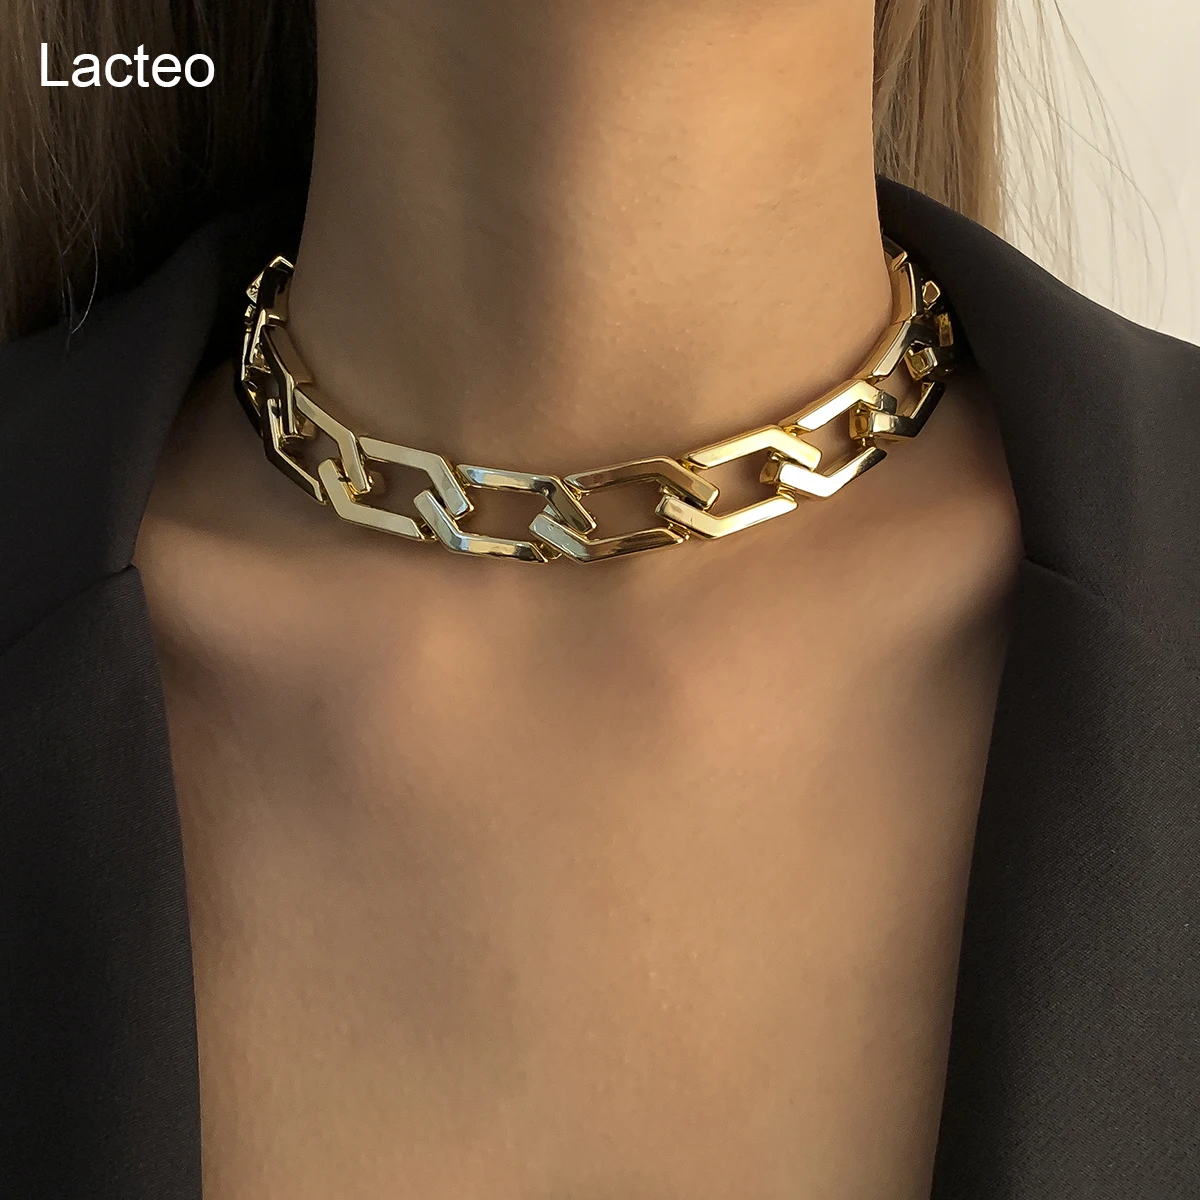 

Lacteo Neo Gothic Geometric Rhombus O Shape Choker Necklace For Women Fashion Trendy Neck Clavicle Chain Jewelry Necklace